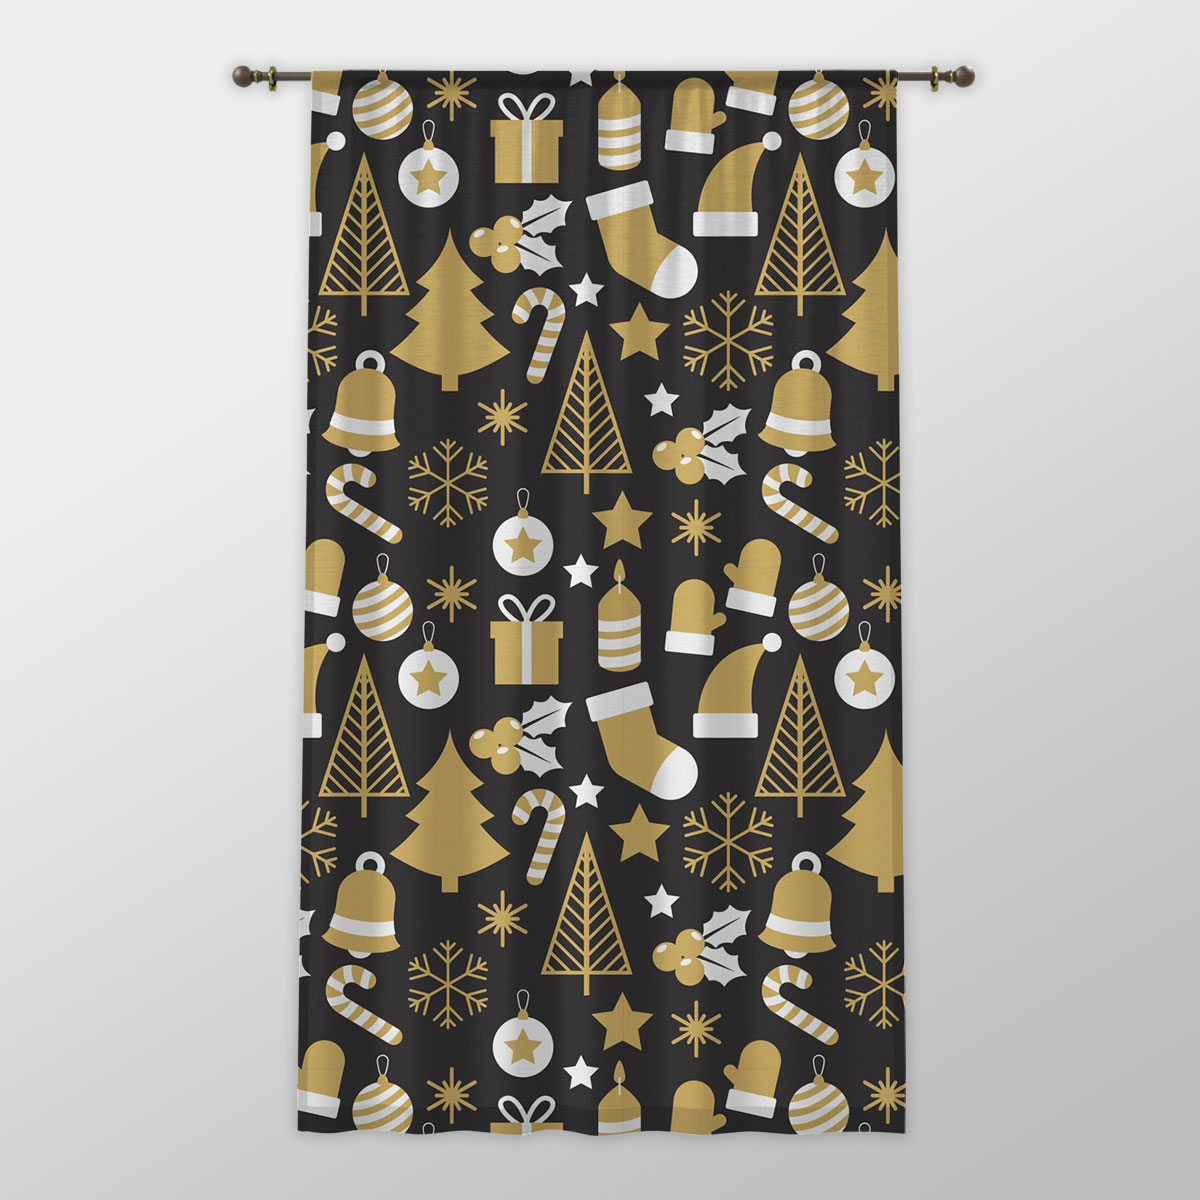 White And Gold Christmas Socks, Christmas Tree, Candy Cane On Black Background One-side Printed Window Curtain